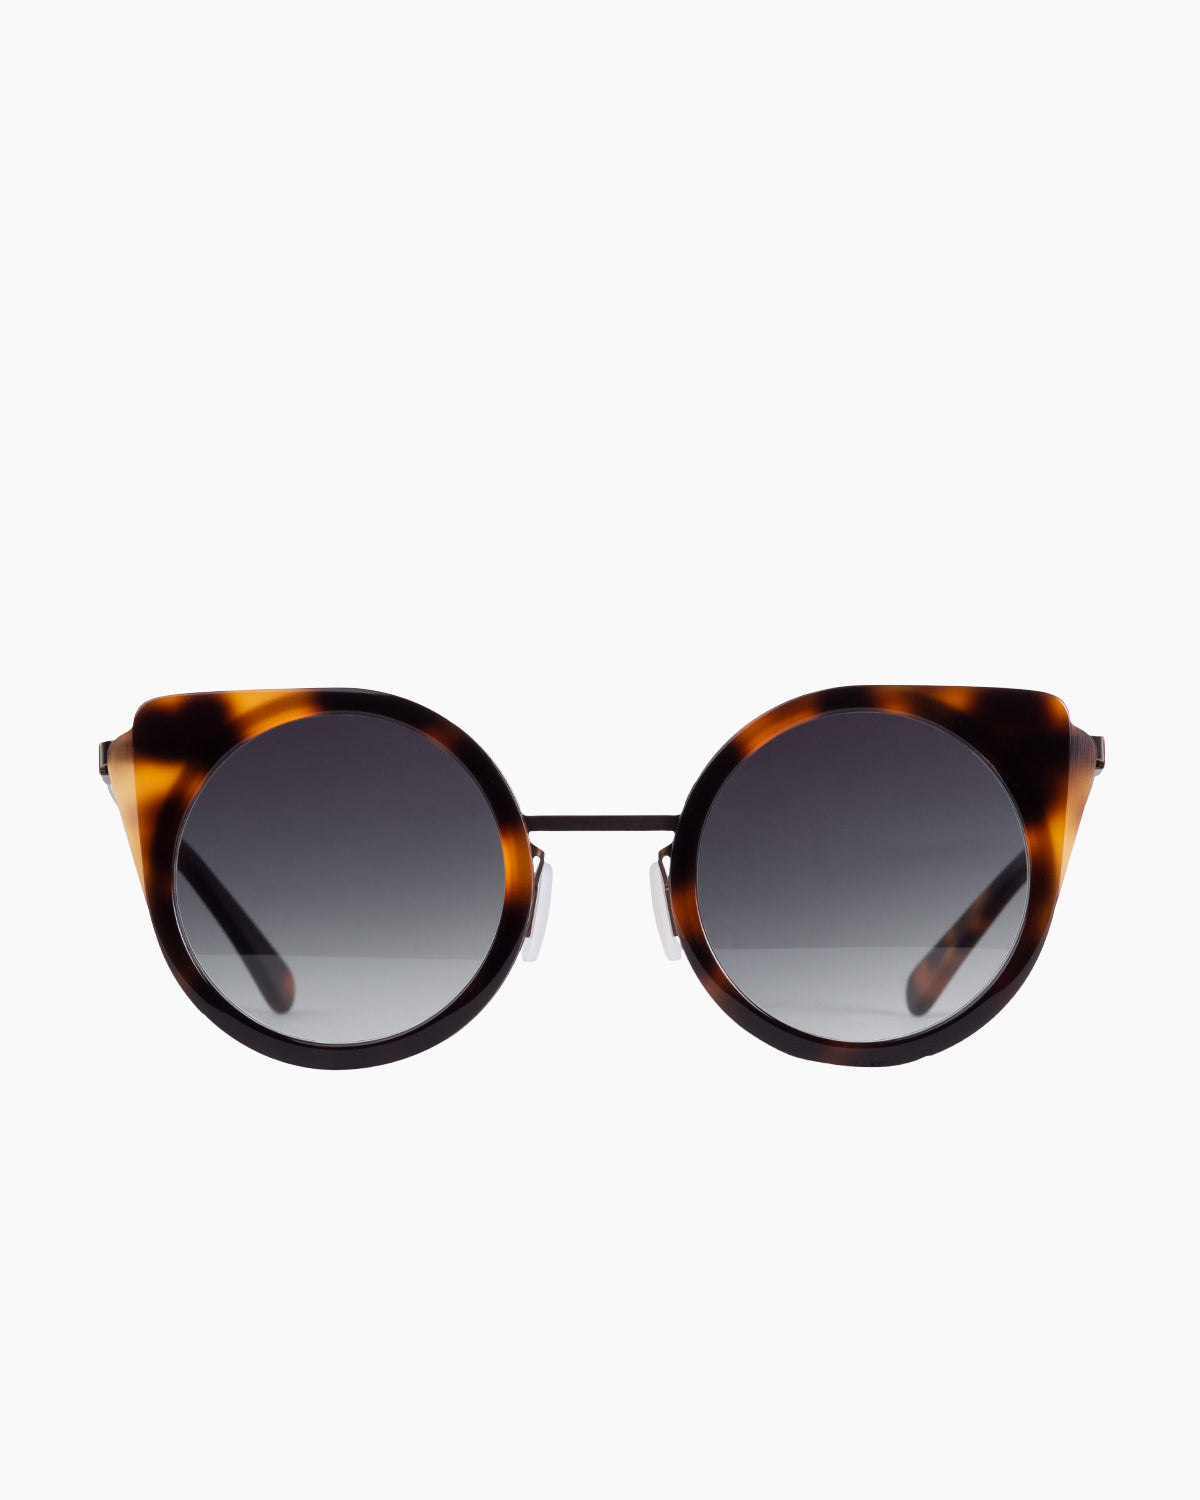 Gamine - CatS - Havana/Copper | glasses bar:  Marie-Sophie Dion